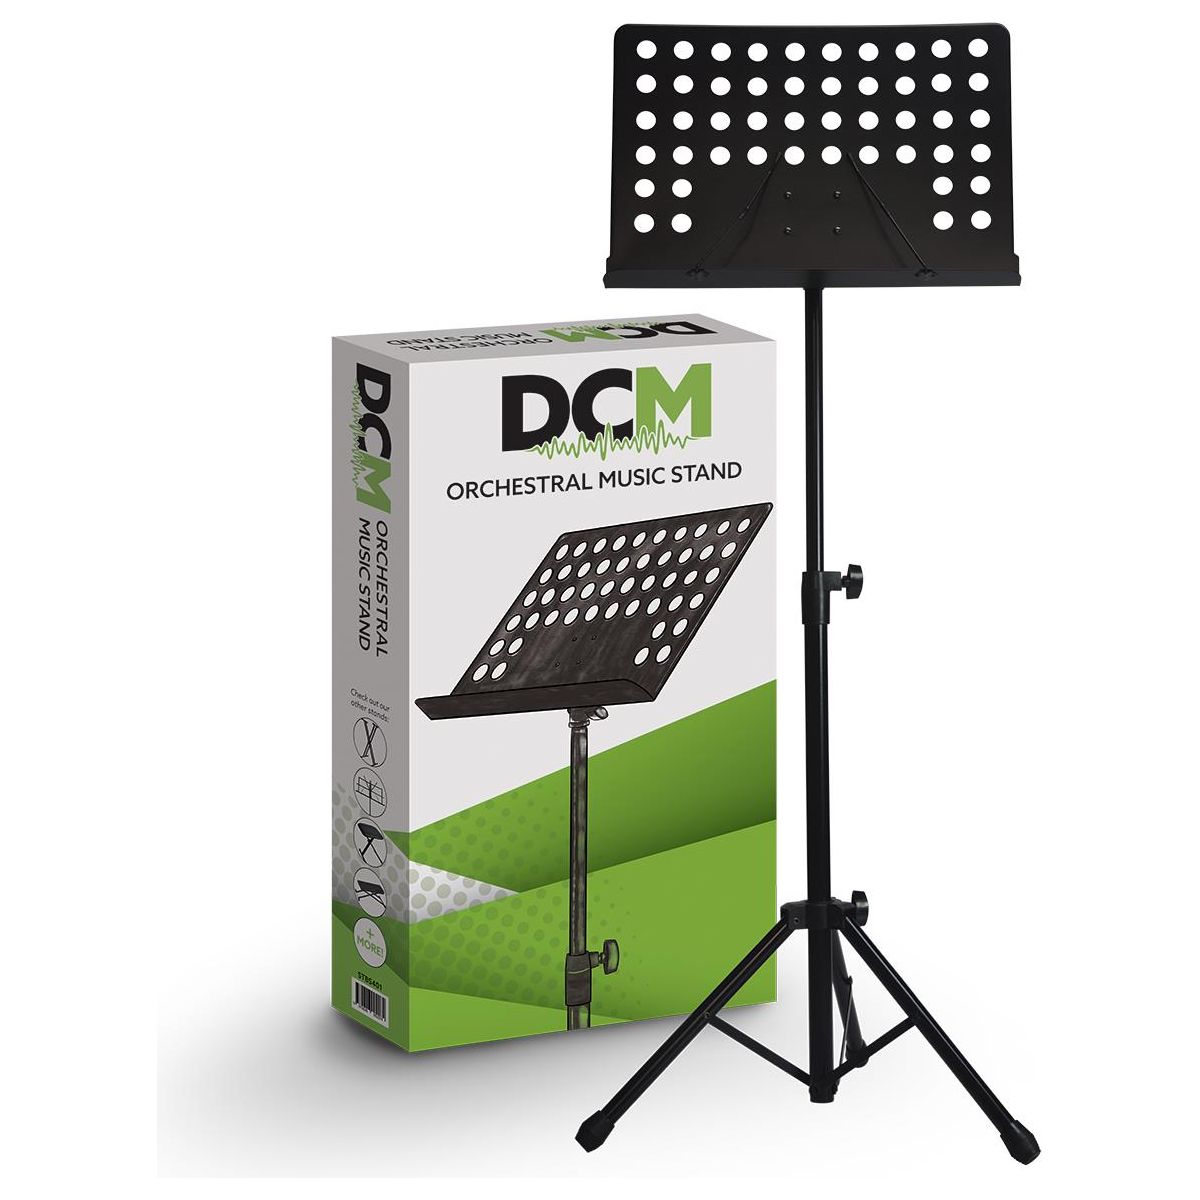 DCM Orchestral Music Stand Black BS401